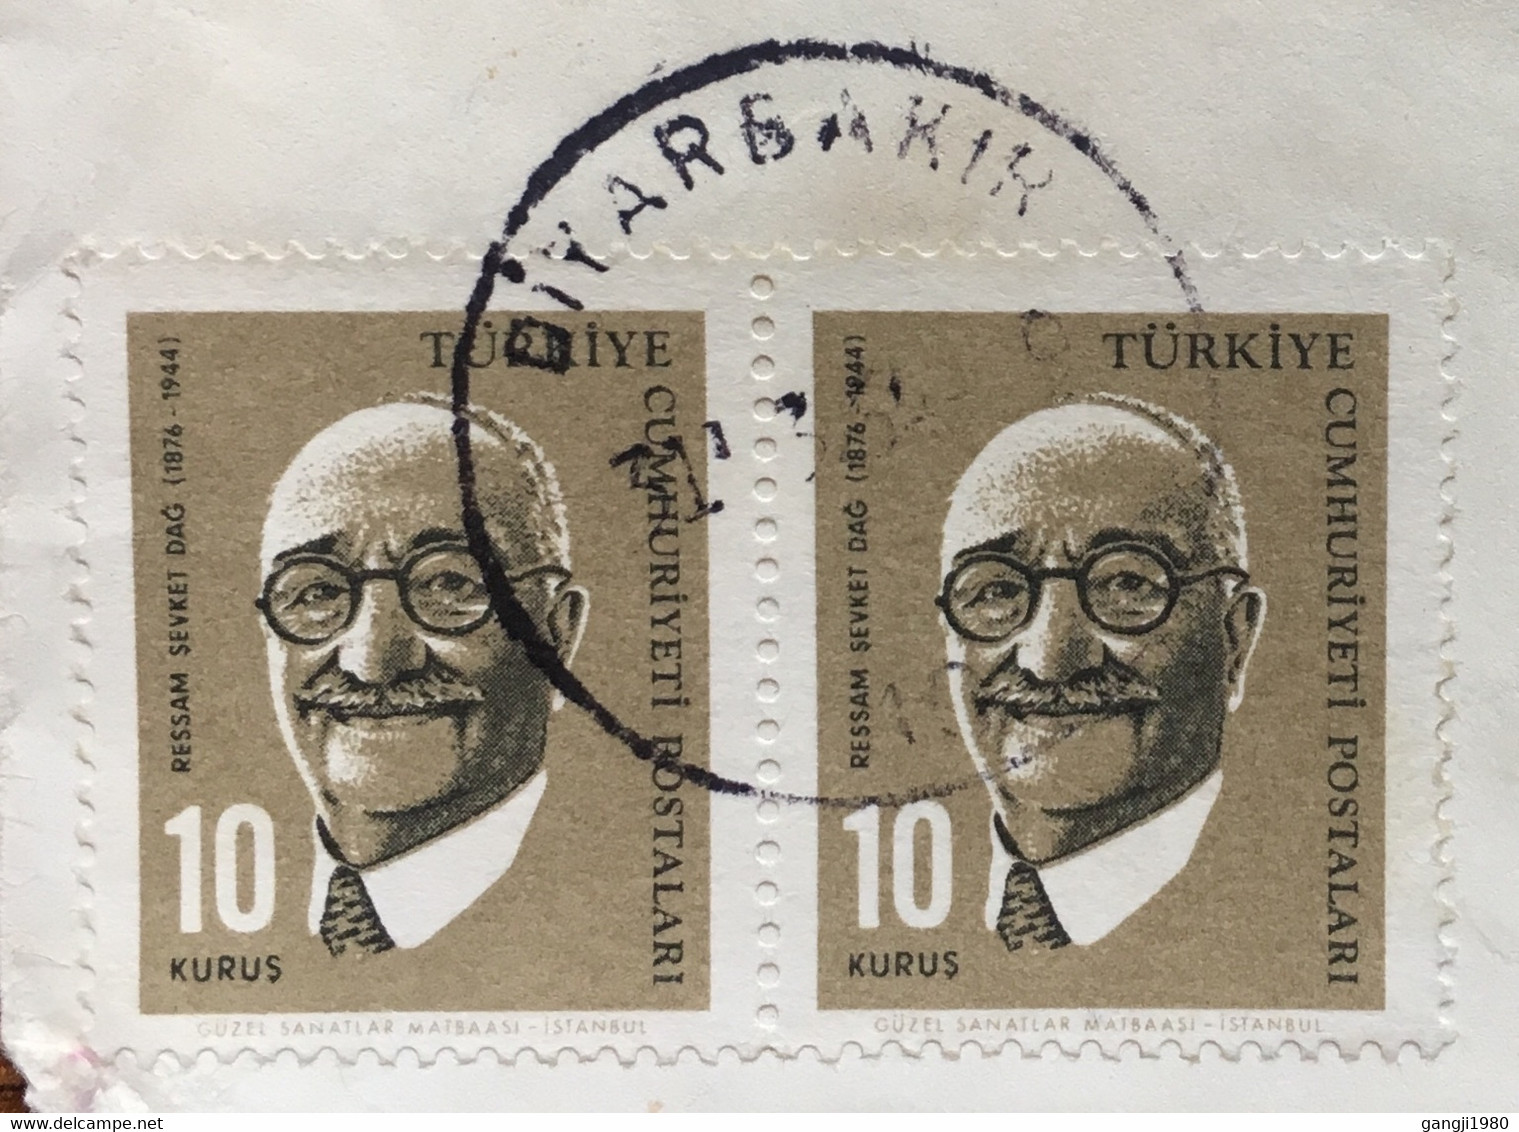 TURKEY 1964, VIGNETTE AIRMAIL LABEL ,POPLIN ARFIL RARE ! 4 STAMPS RESSAM ,CANKAYA ,COVER DIYARBAKIR CITY CANCELLATION TO - Covers & Documents